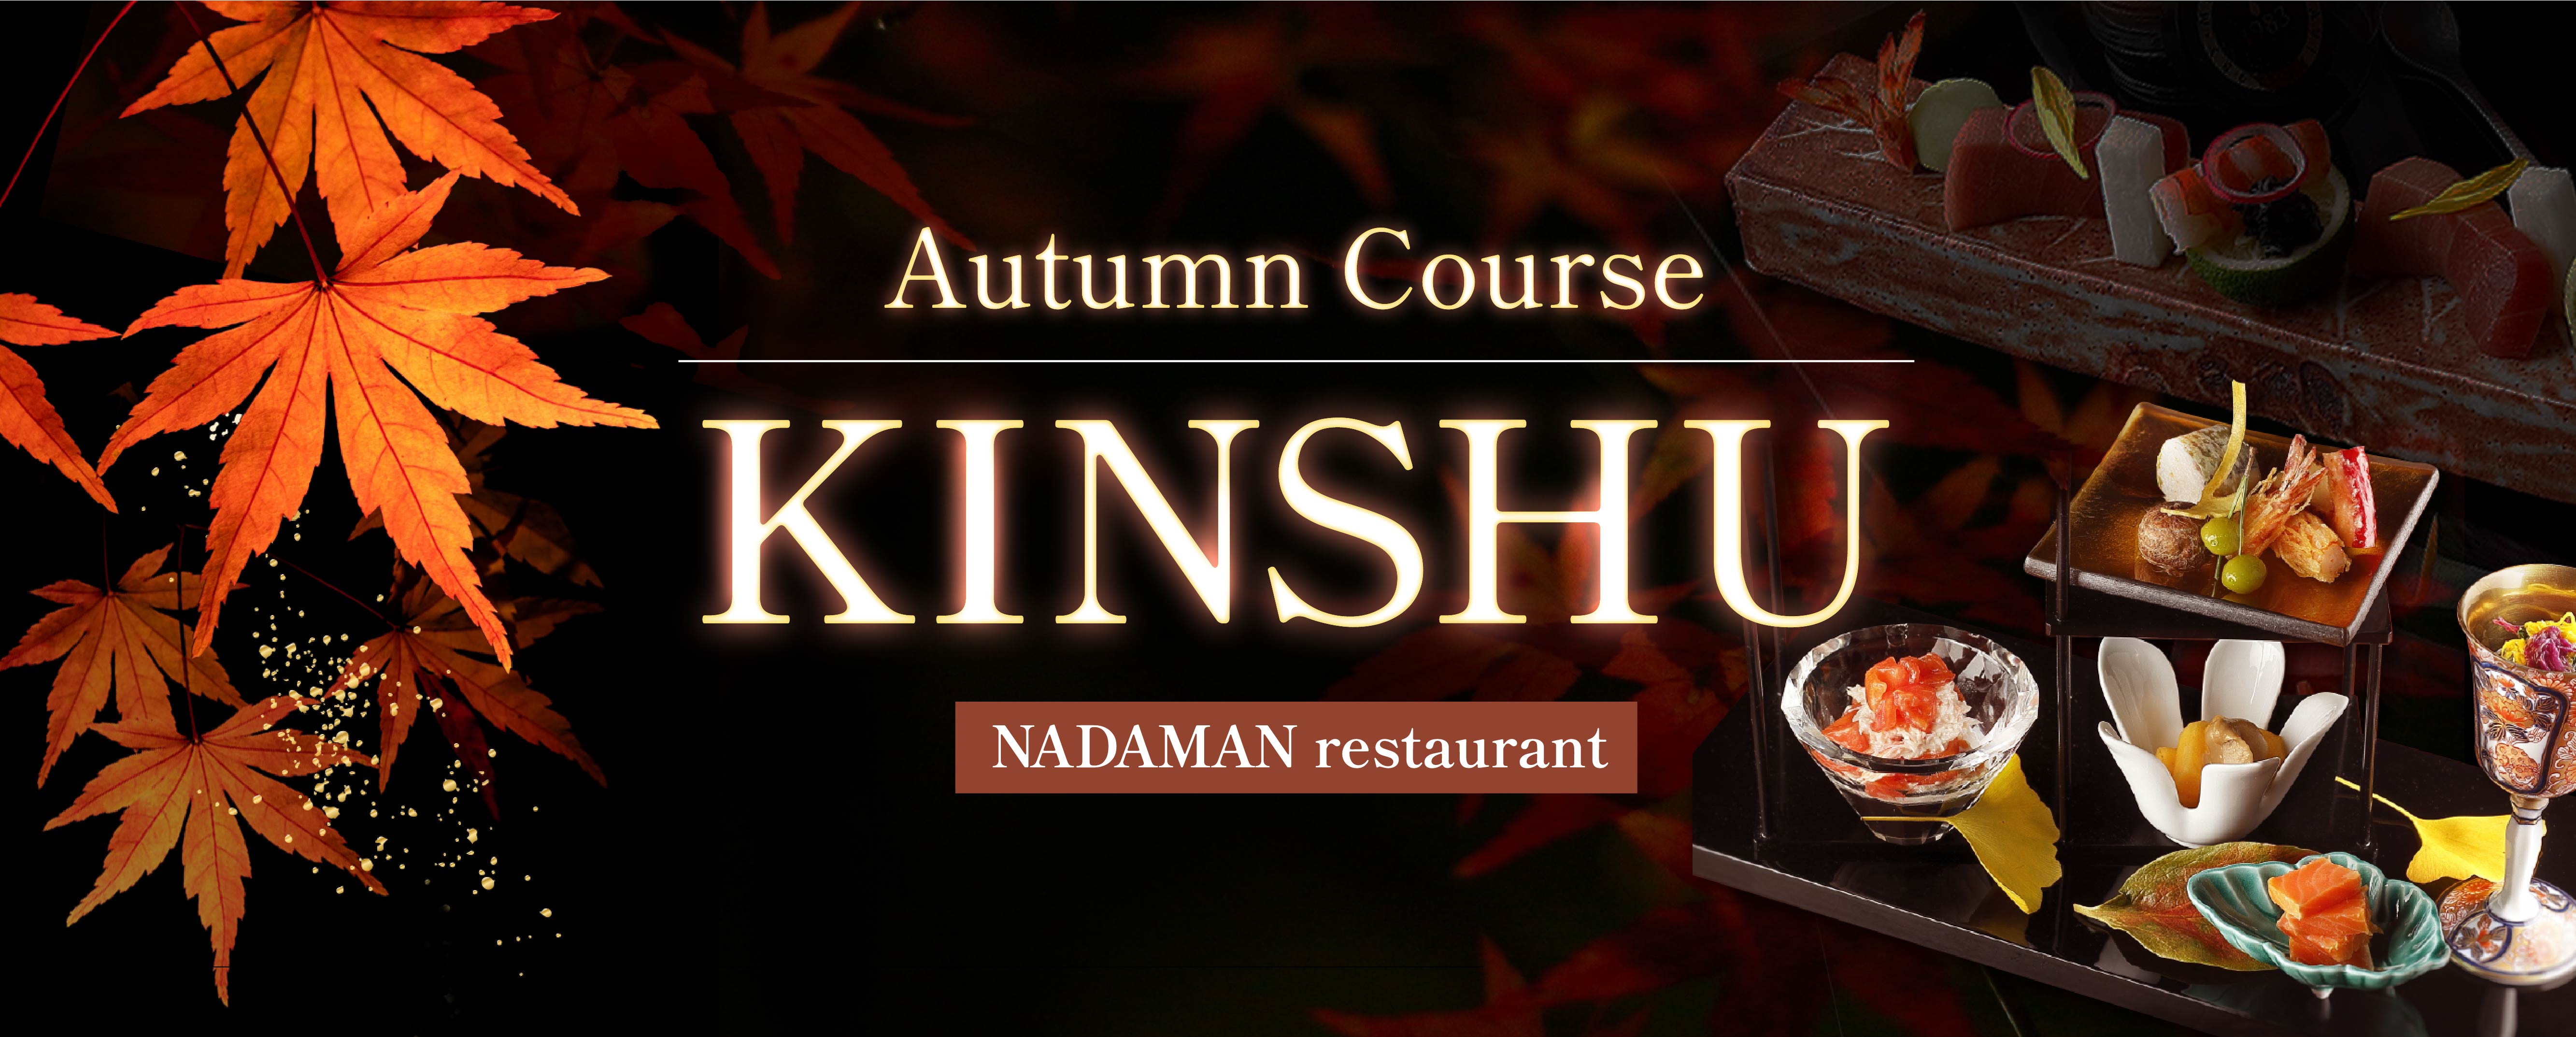 Information about the restaurant November event “Autumn Course Kinshu”